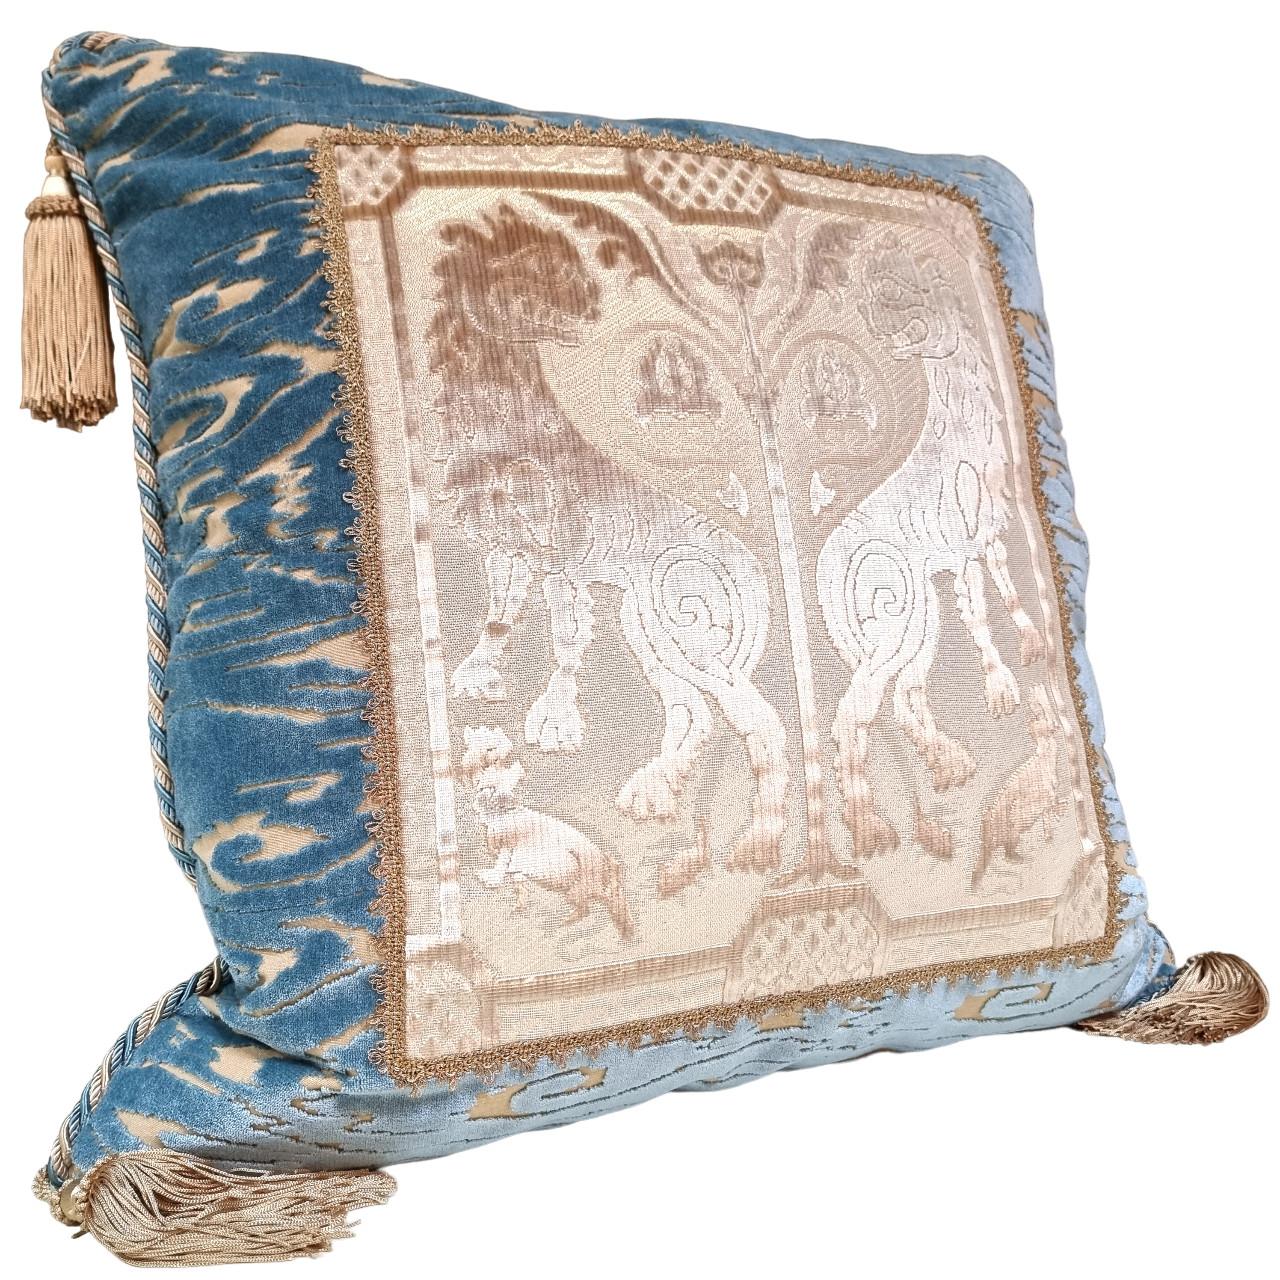 This amazing decorative pillow with beige tassel at the four corners is handmade using sky blue Luigi Bevilacqua velvet Radica pattern on both sides finished with Houlès multicolor twisted lip cord, embellished with front positioned panel in Luigi